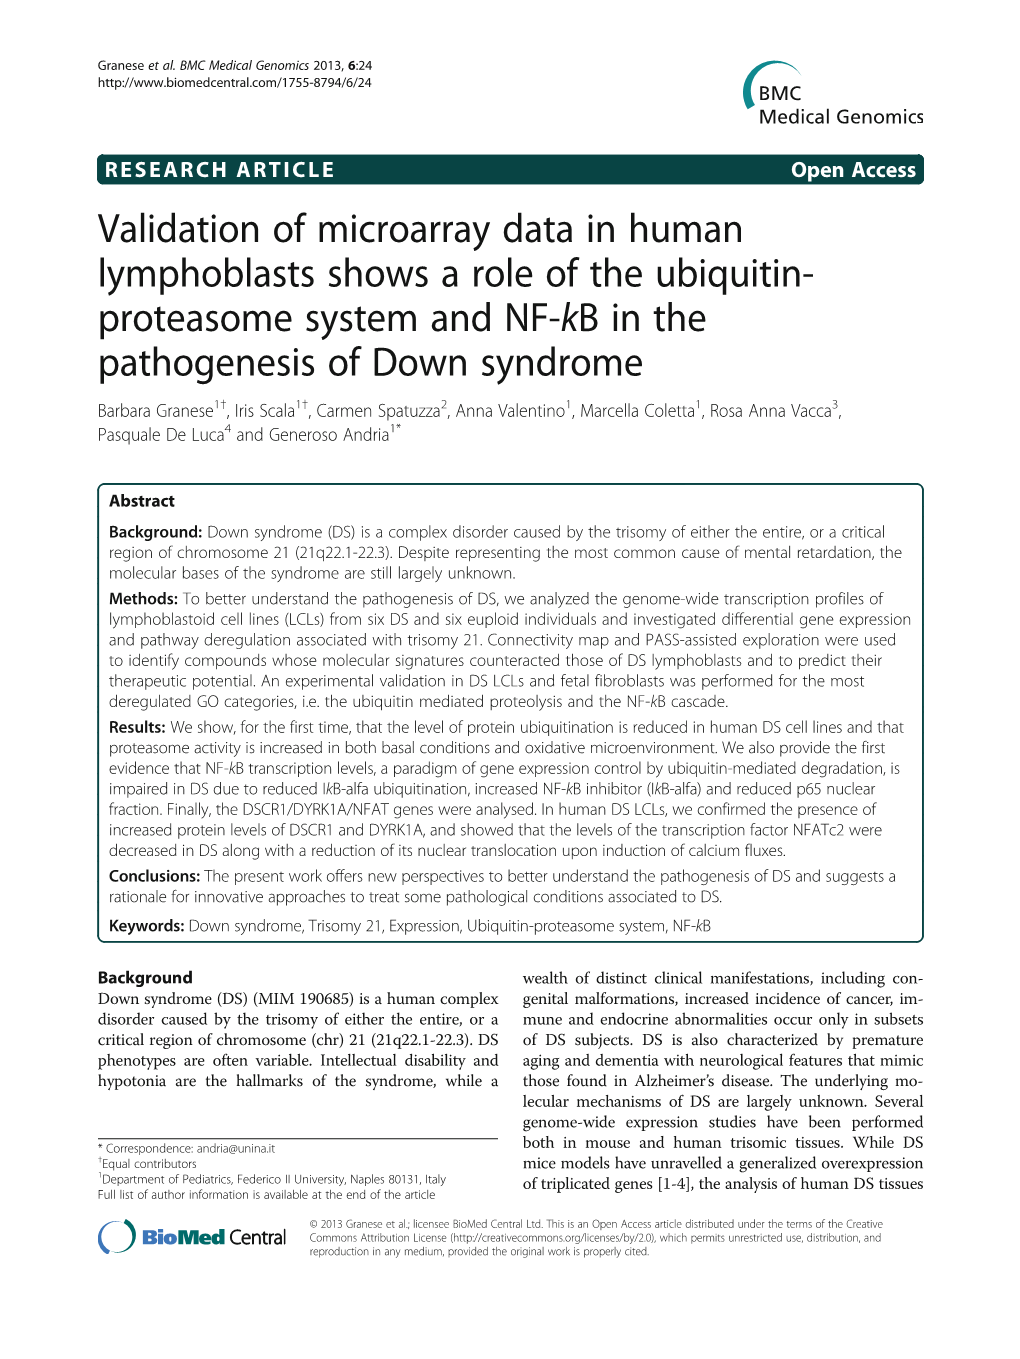 Validation of Microarray Data in Human Lymphoblasts Shows a Role of the Ubiquitin- Proteasome System and NF-Kb in the Pathogenes